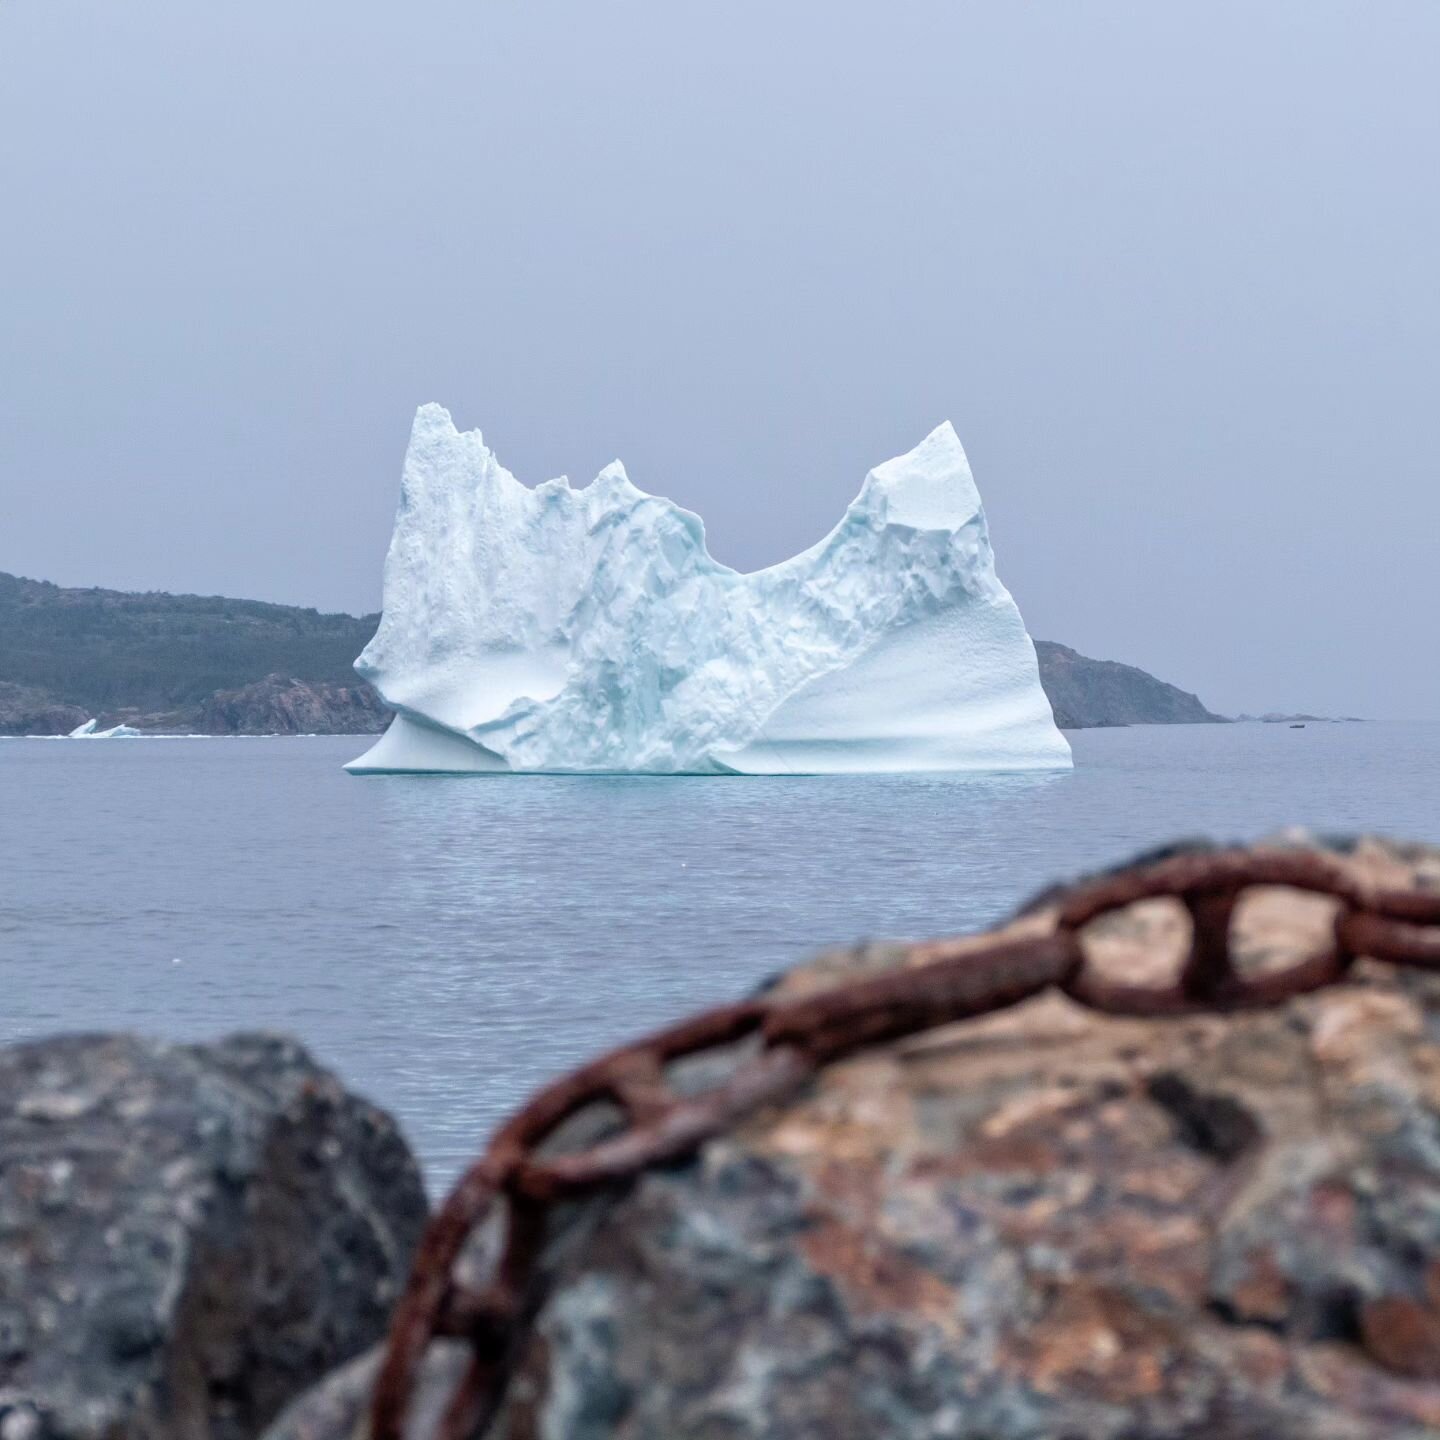 🚐 Crossing the causeway to South Twillingate, I could not contain my delight over the icebergs in the harbor
.
😲 Sammy was perched on the dashboard, completely nonplussed by my sudden frenzied shouting 
.
😲 Exclamations, all expletives, none poeti